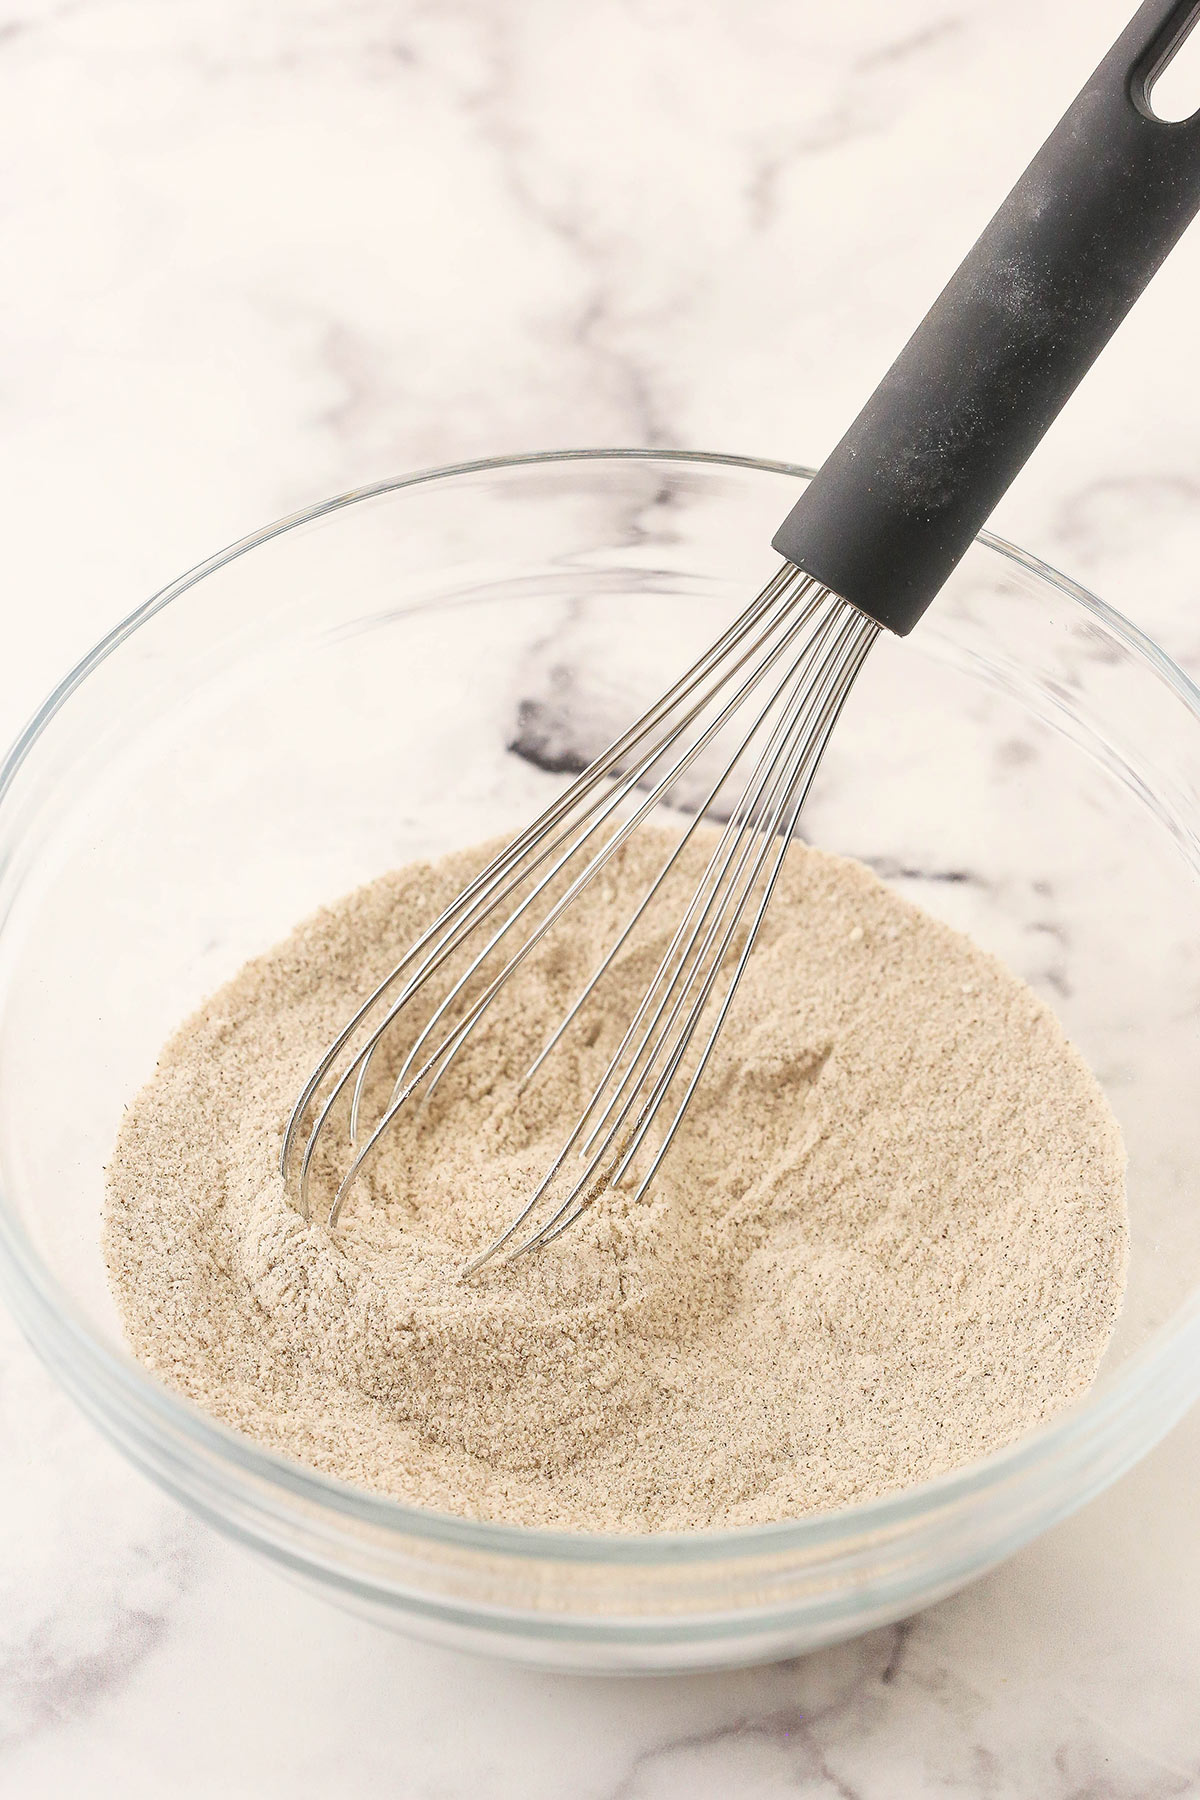 A whisk being used to combine the dry ingredients for the cinnamon streusel